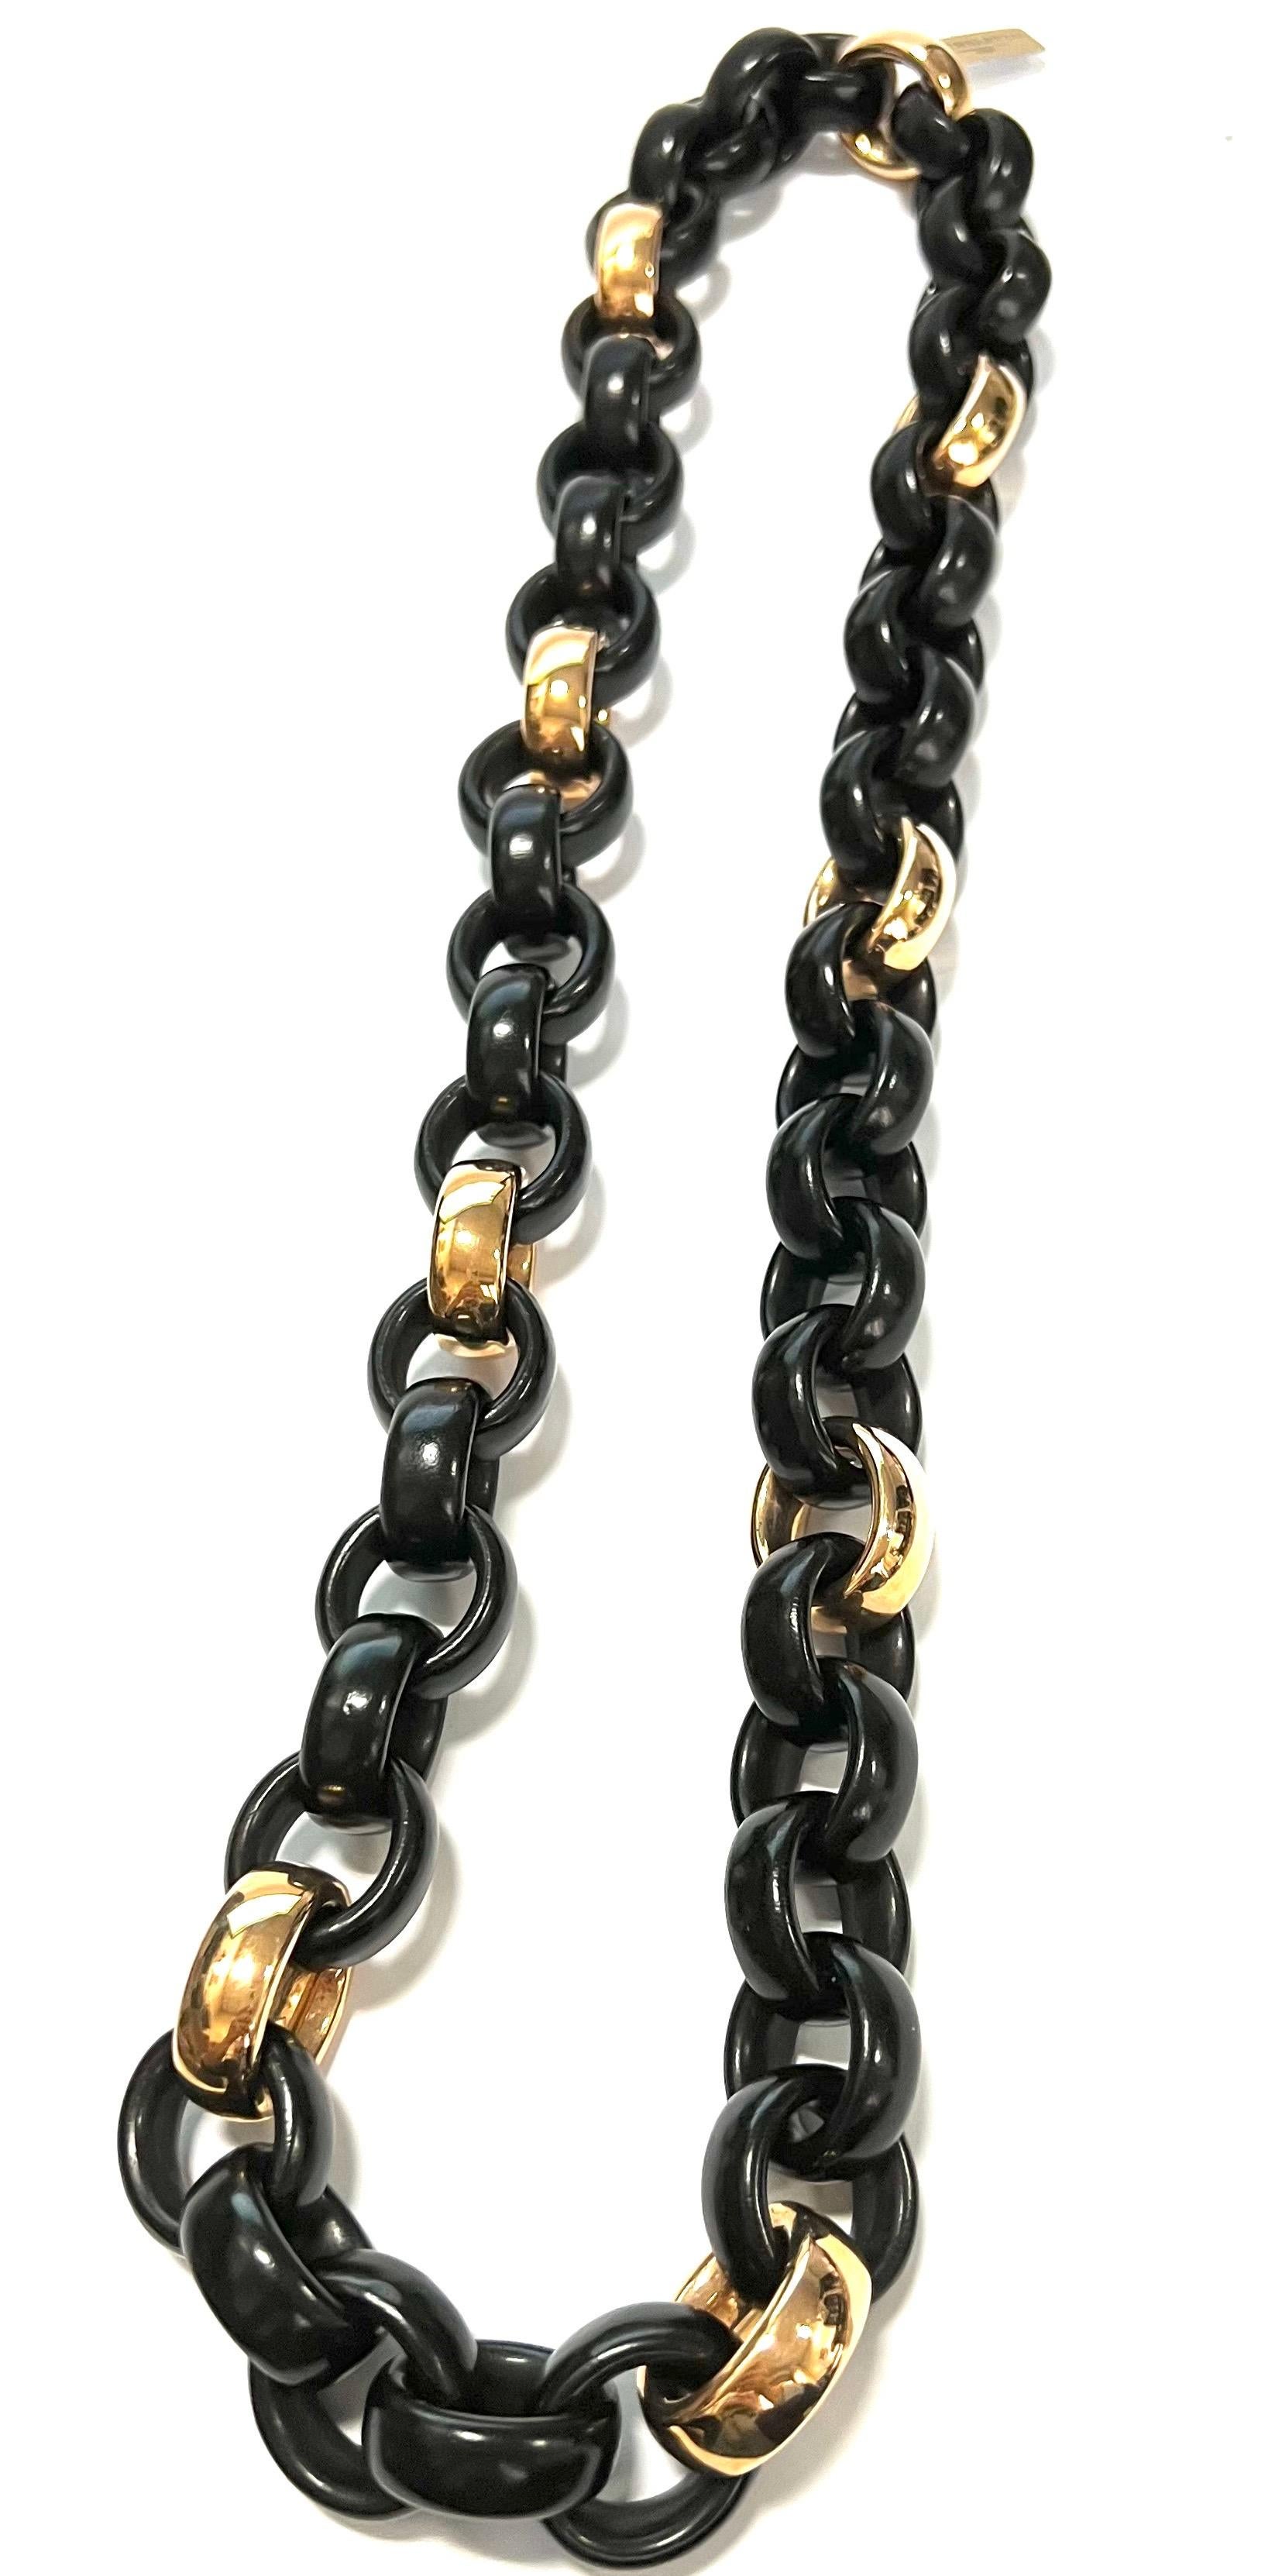 Long Necklace With 18k Rose Gold and Ebony Round Links
This necklace is cm.84 long and it has a hidden opening.
Total weight gr. 190.7
Gold weight gr. 67.1
Stamp ITALY, 10 MI, 750
